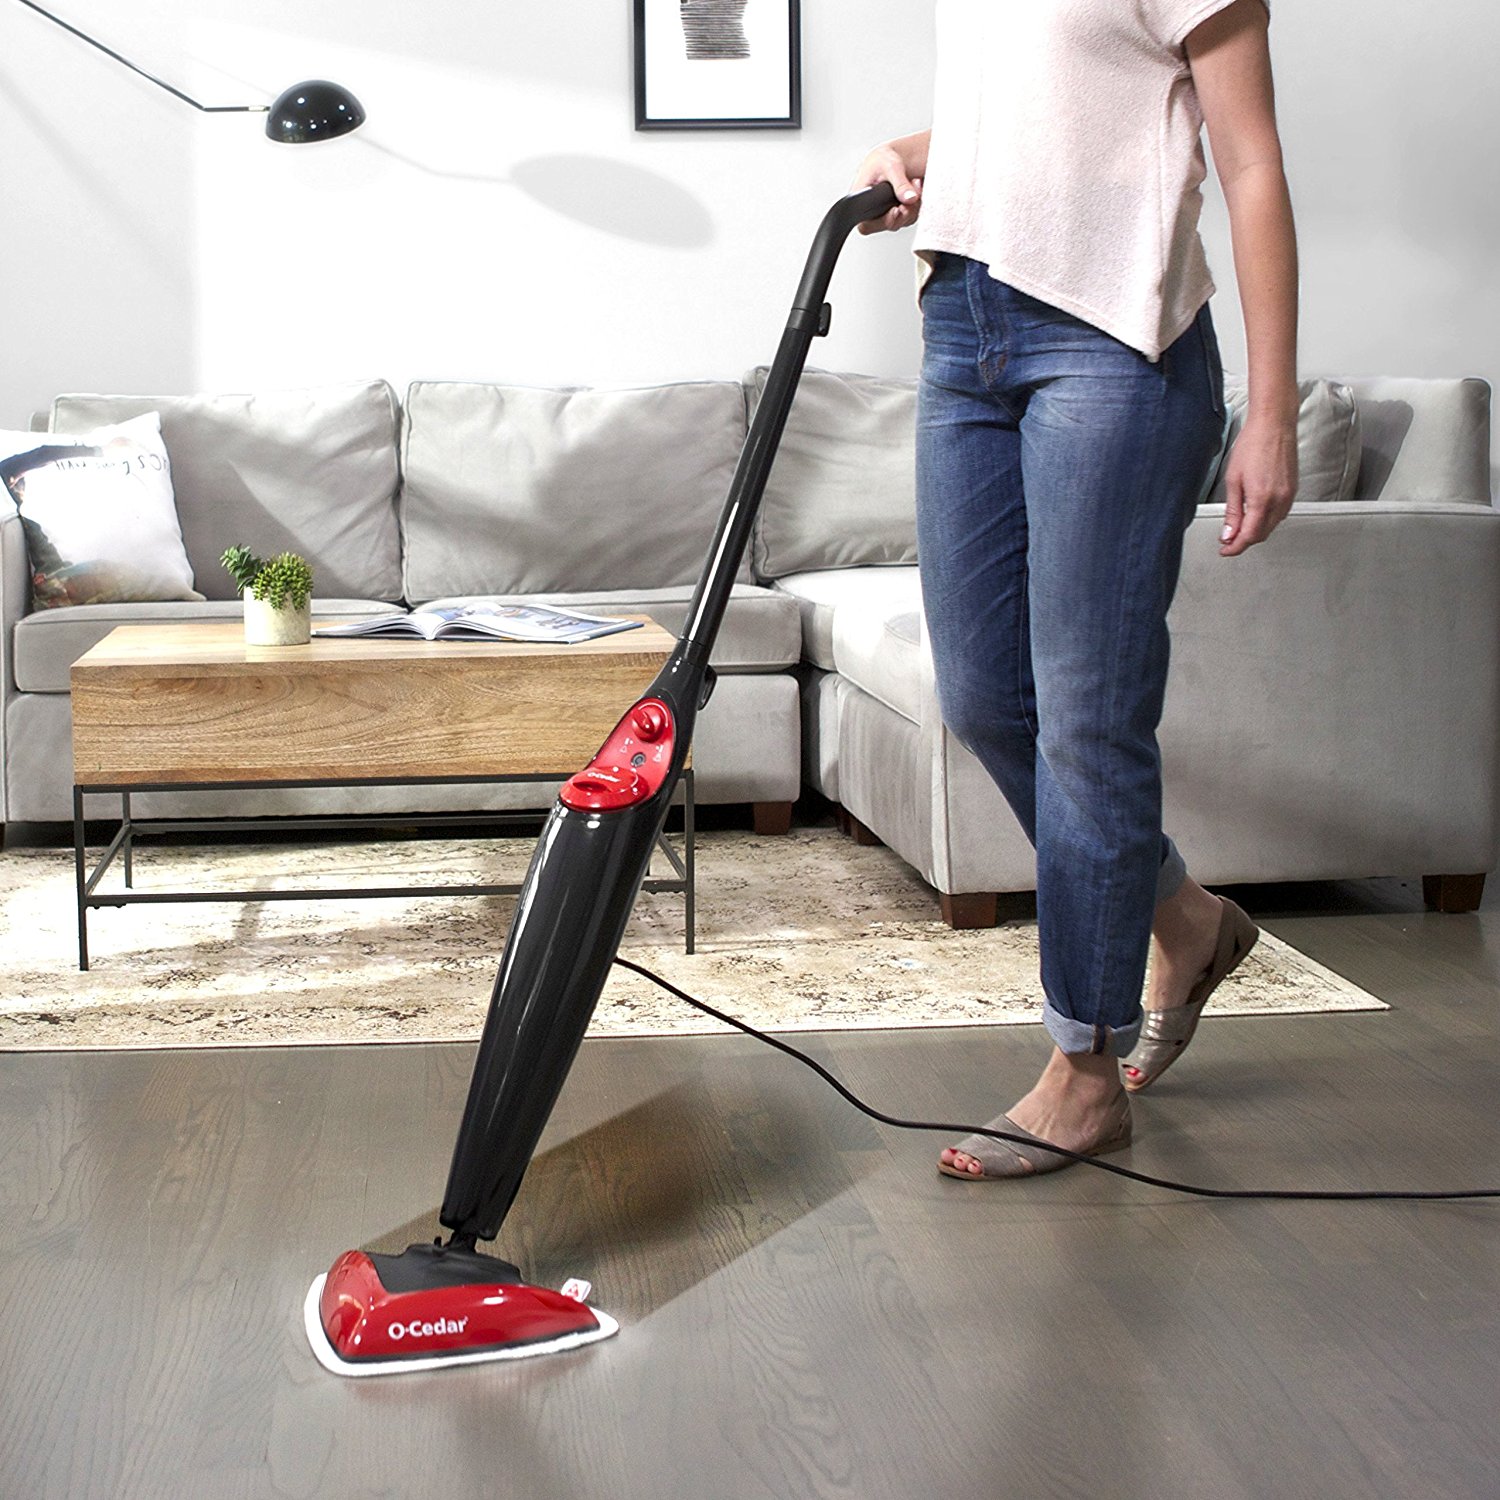 Best Steam Mops Reviews Price Comparison 2020 Earlyexperts